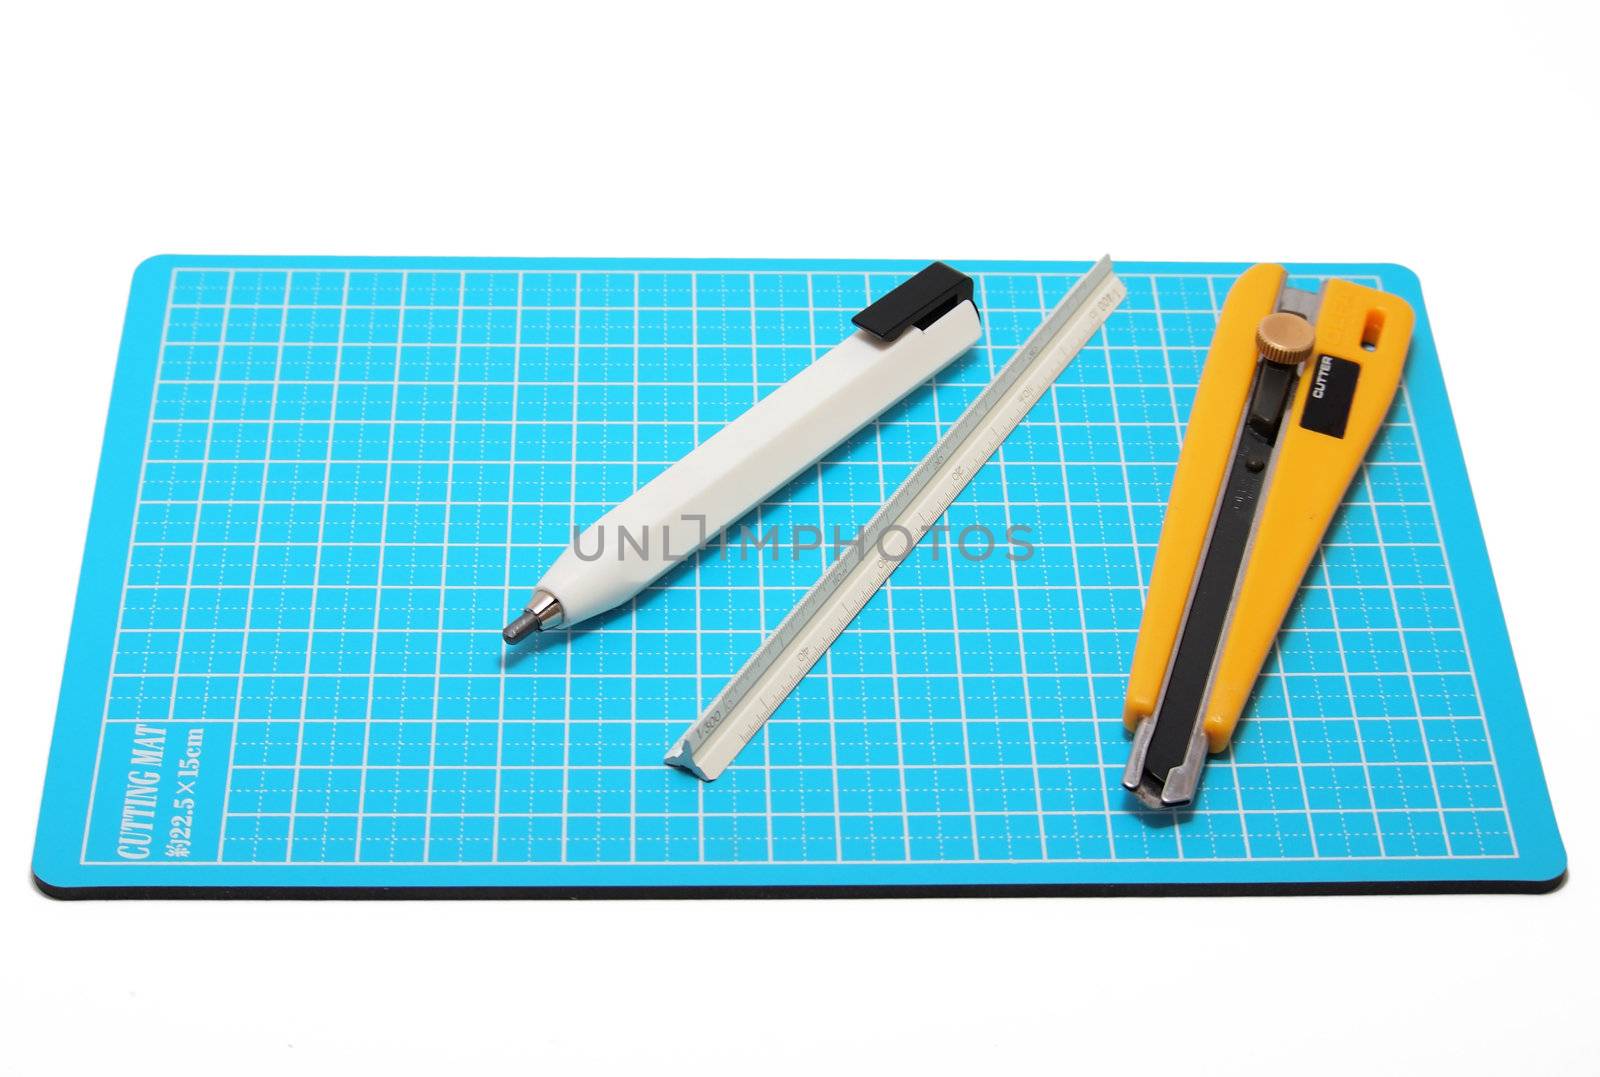 Cutter,pencil and Scale placed on blue cutting mat. by siraanamwong